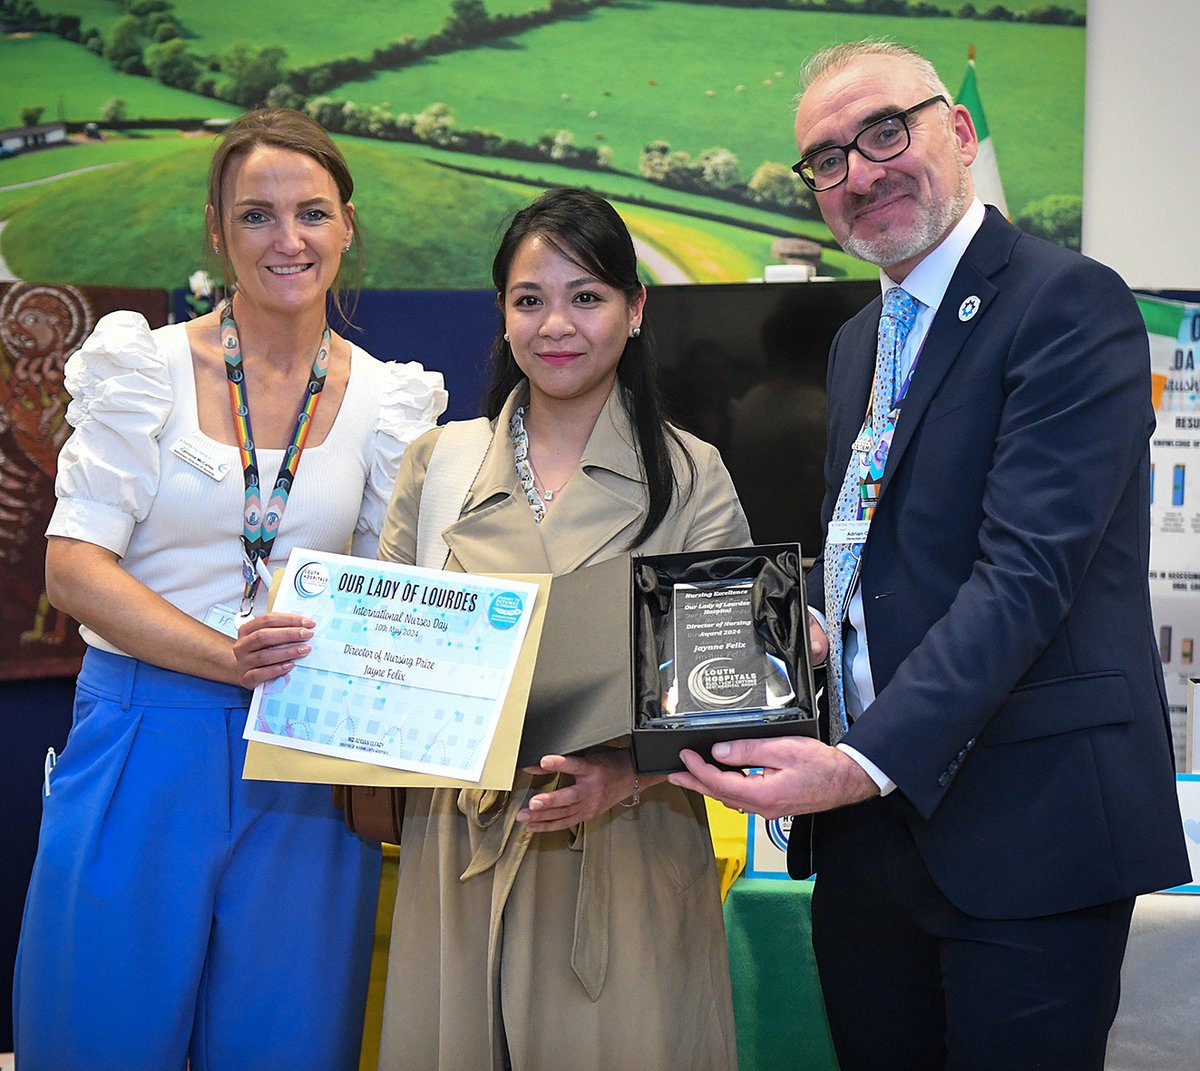 This year our #IND2024 Director of Nursing prize was awarded to Jaynne who has shown both leadership & courage building her team & improving access for our patients showing how her Nursing values shine through. #LivingPathway #DONprize